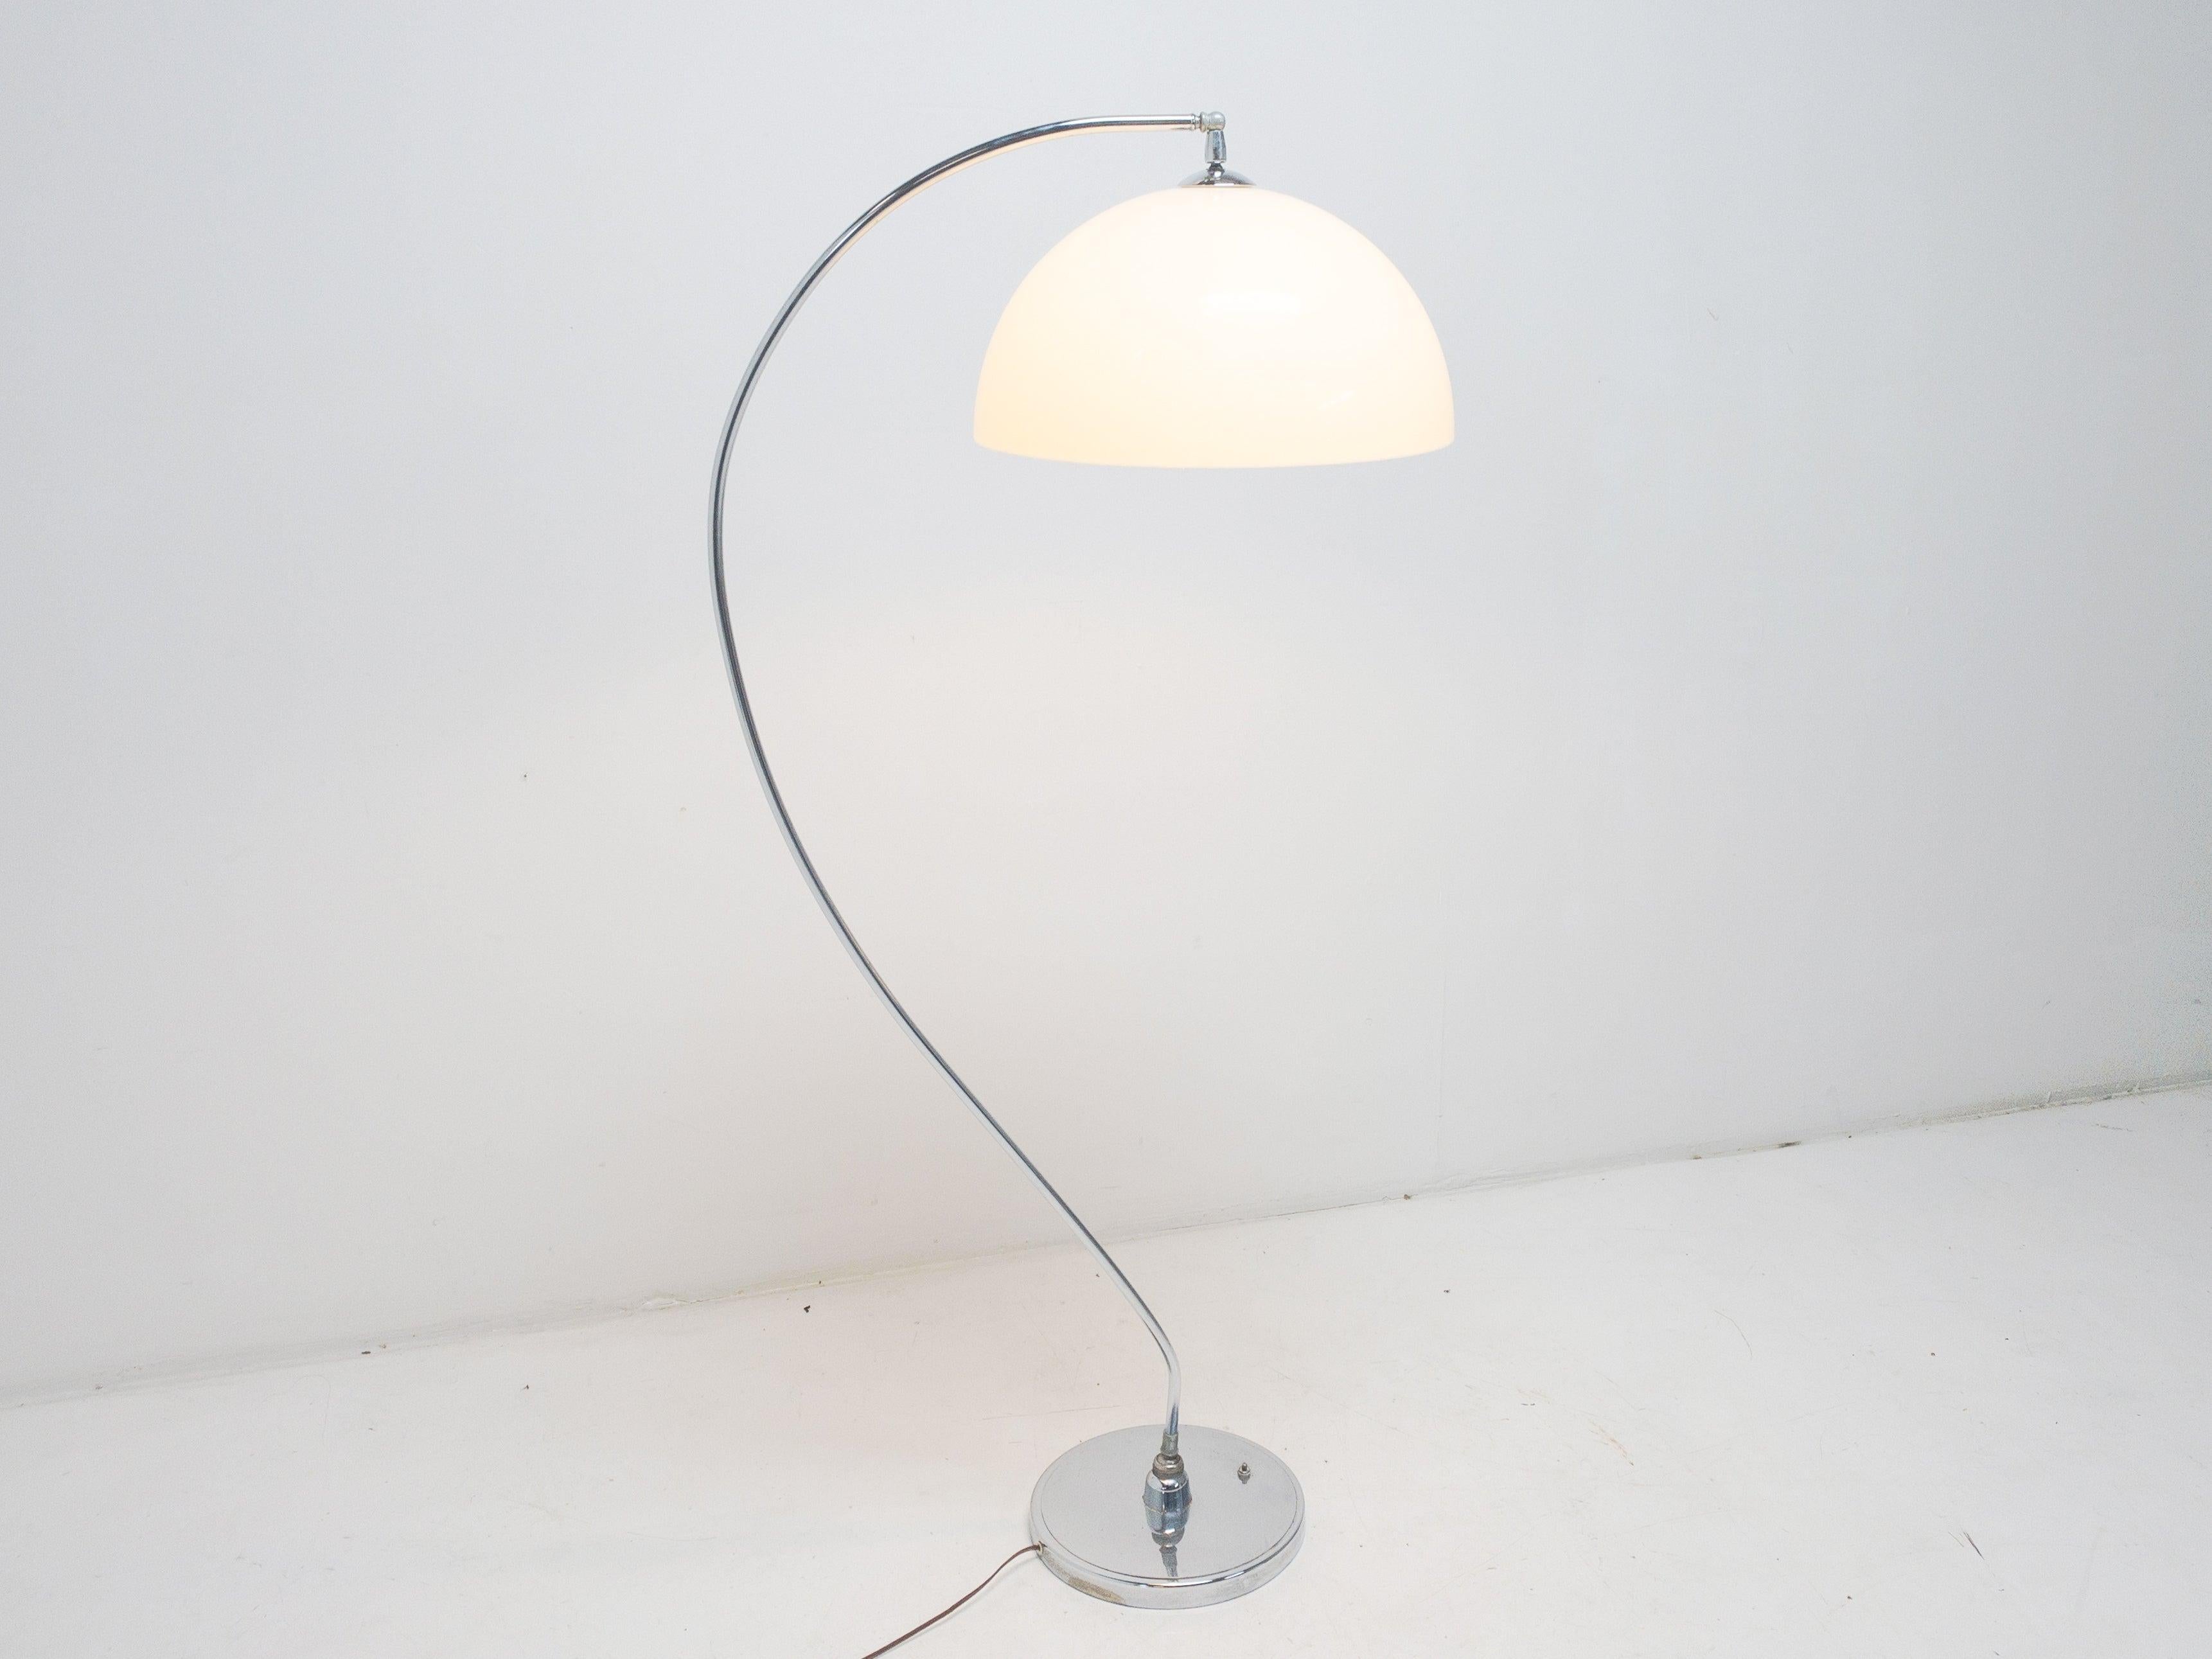 This chrome arc floor lamp, with it’s question mark shaped body and bulbous shade, balances obscure shapes with neutral colors such as cream on chrome.

- Measures : 53